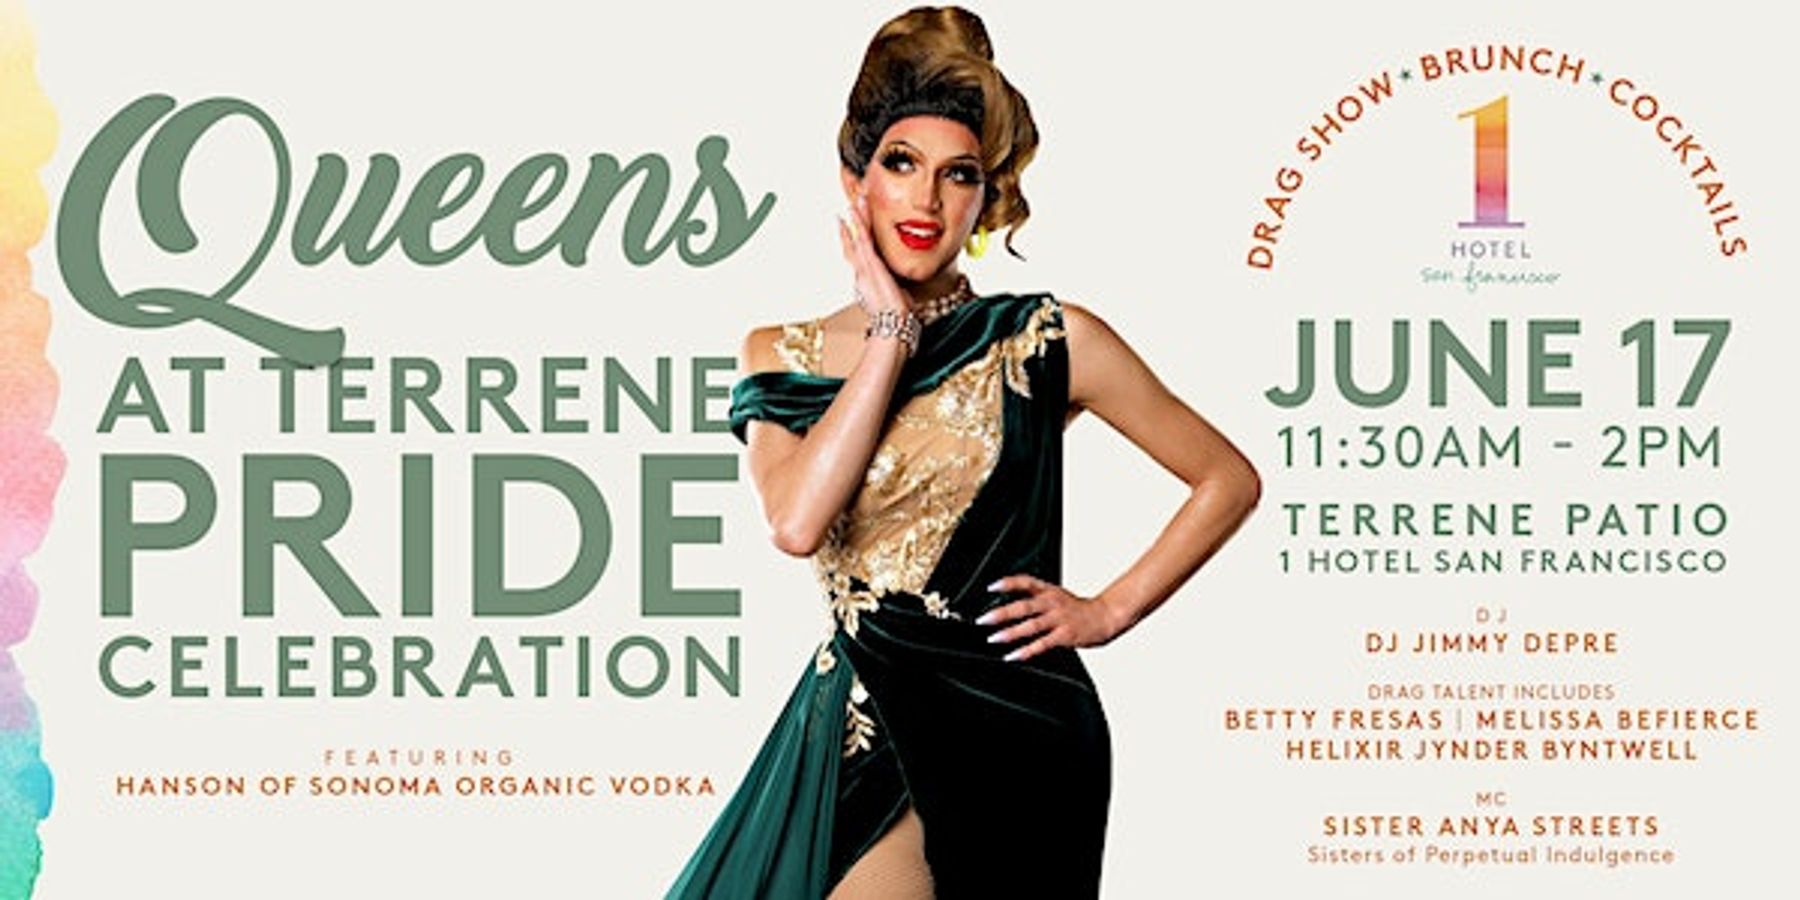 Queens at Terrene Pride Celebration | Downtown San Francisco